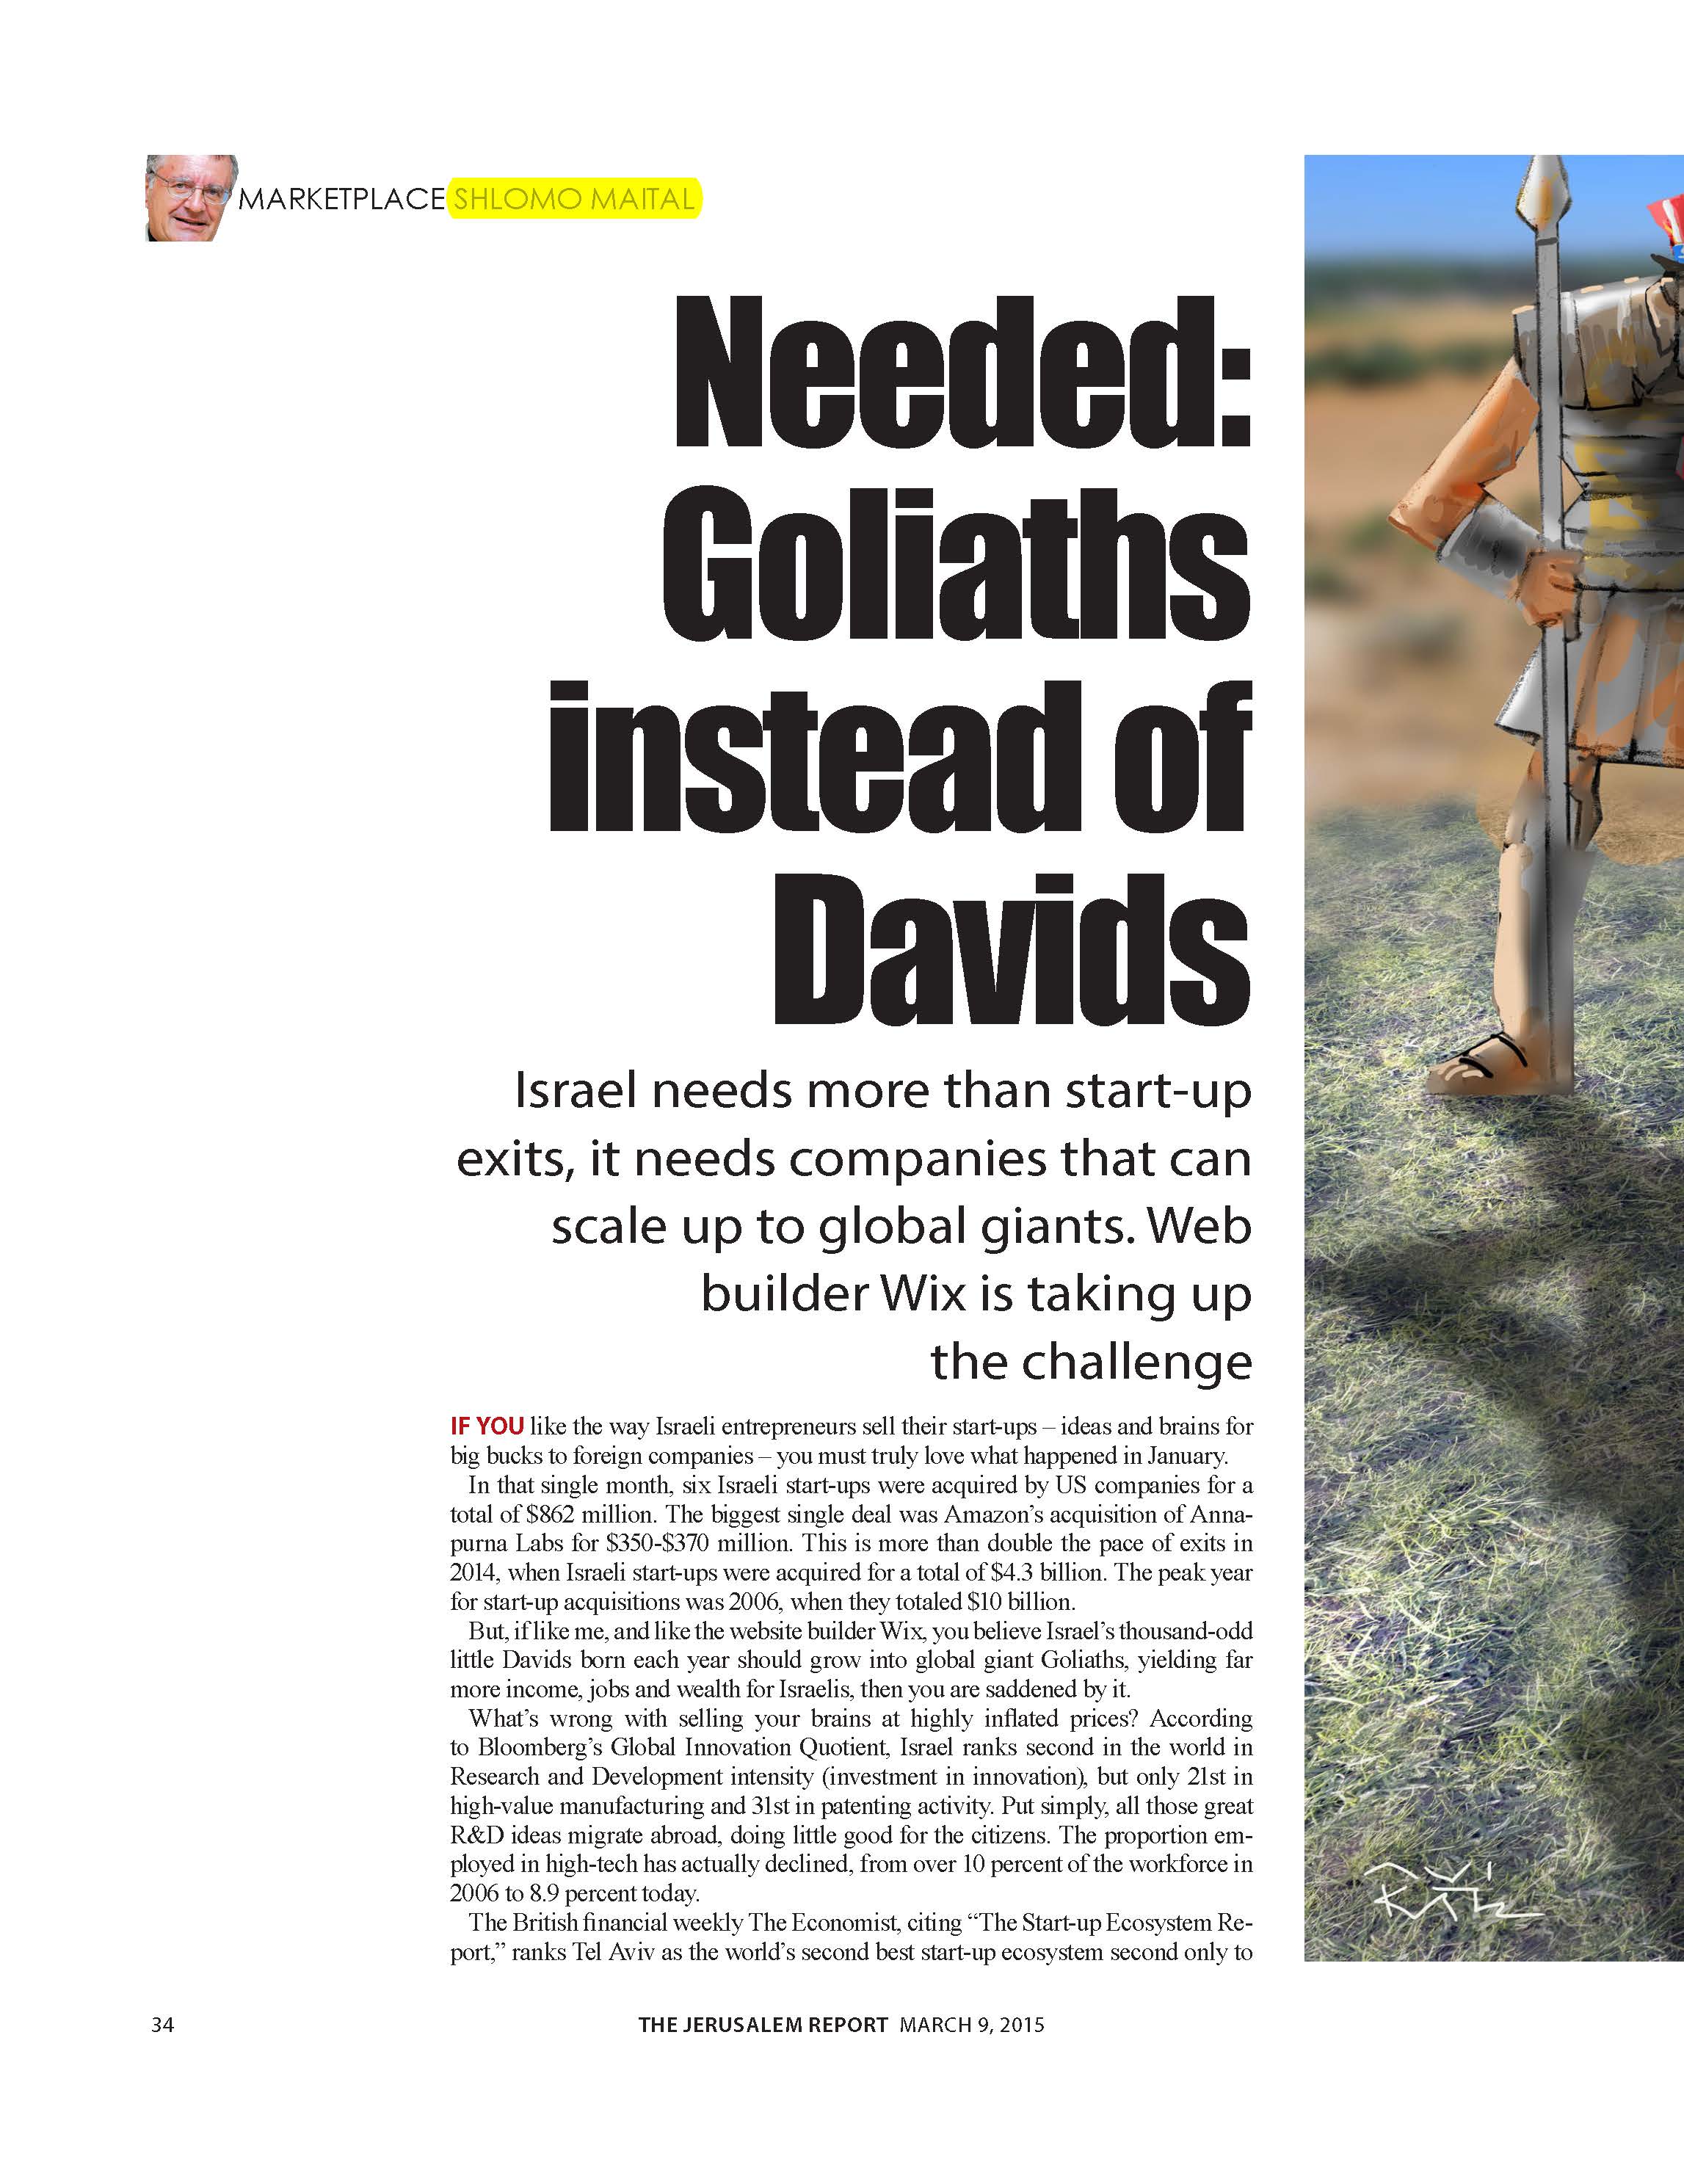 Needed: Goliaths instead of Davids